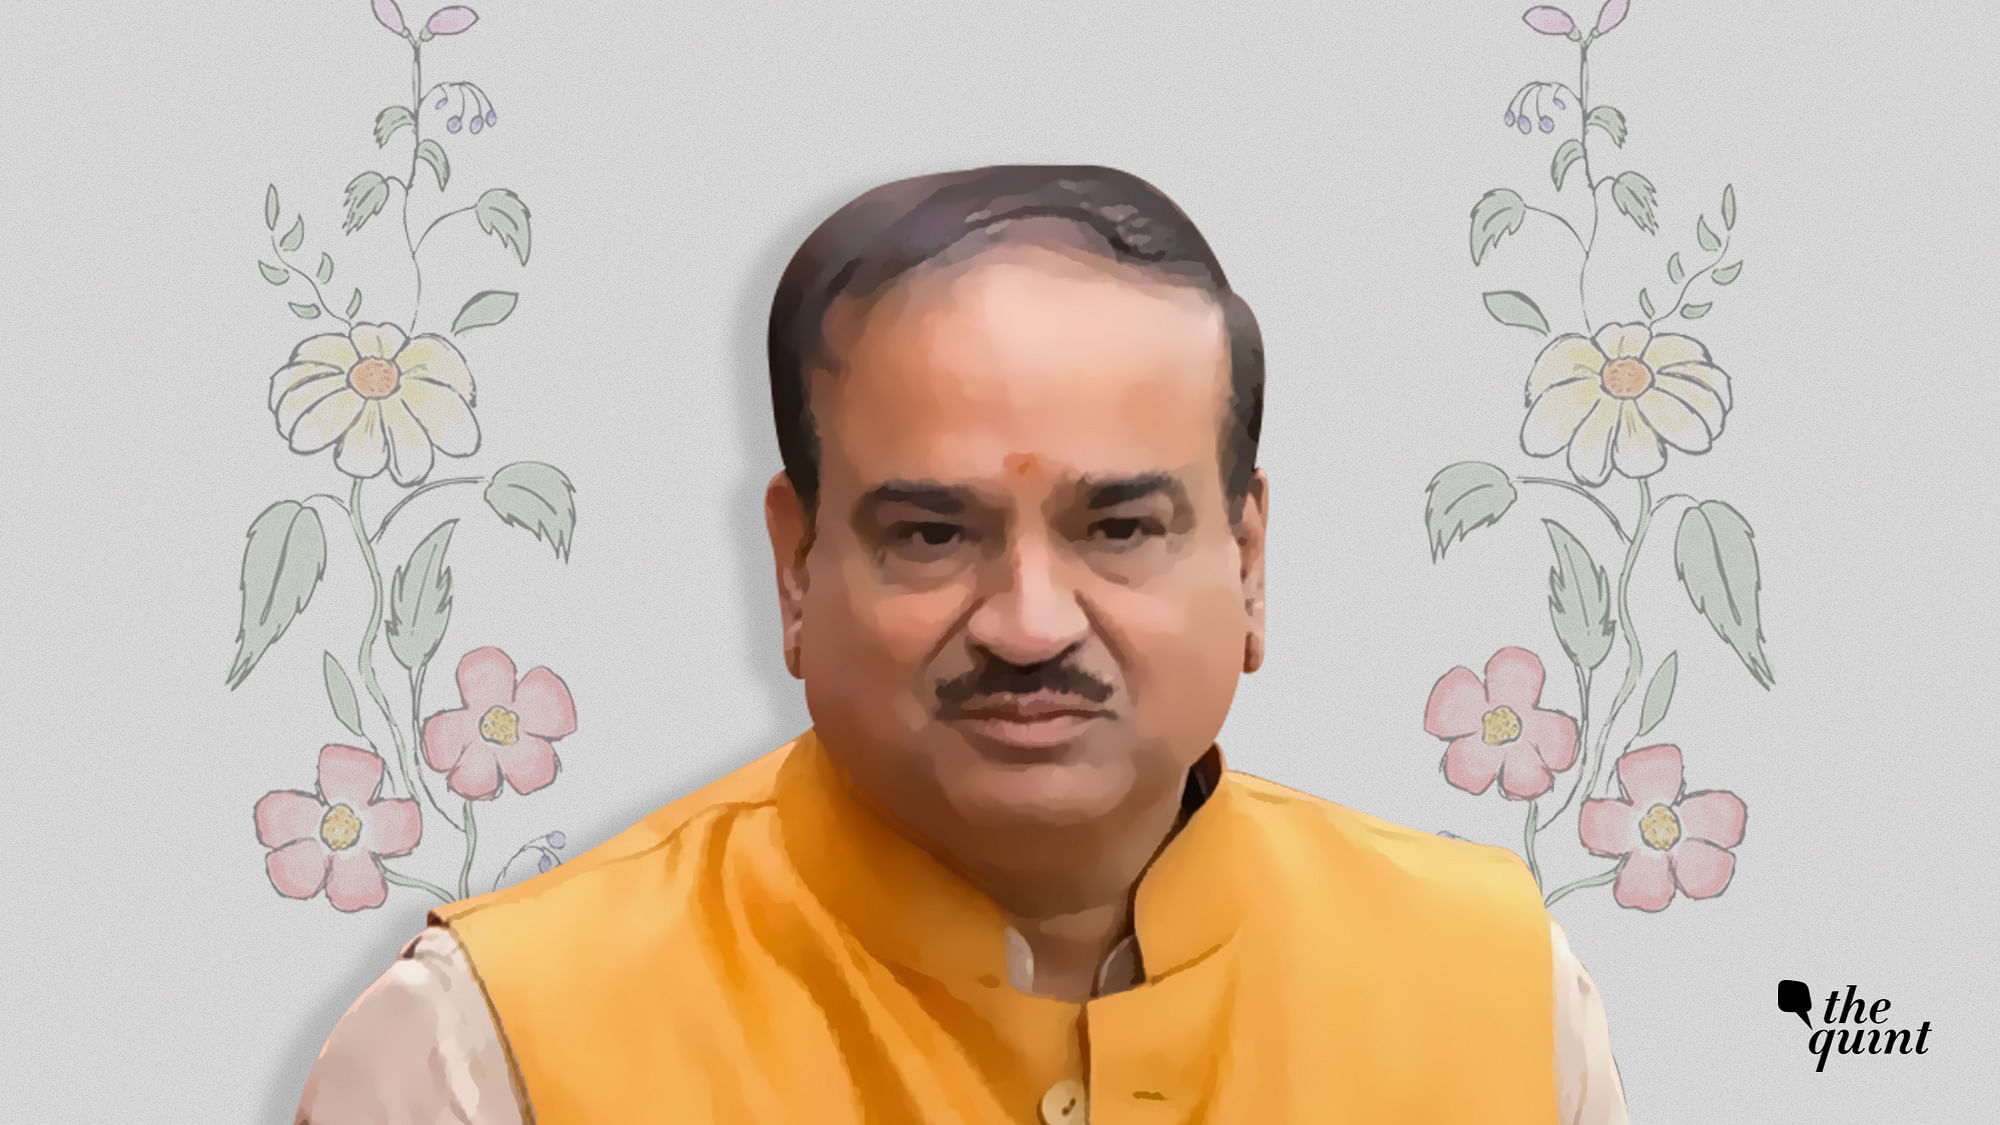 Ananth Kumar passed away in the wee hours of Monday, 12 November, in Bengaluru’s Shankara’s Cancer Hospital.